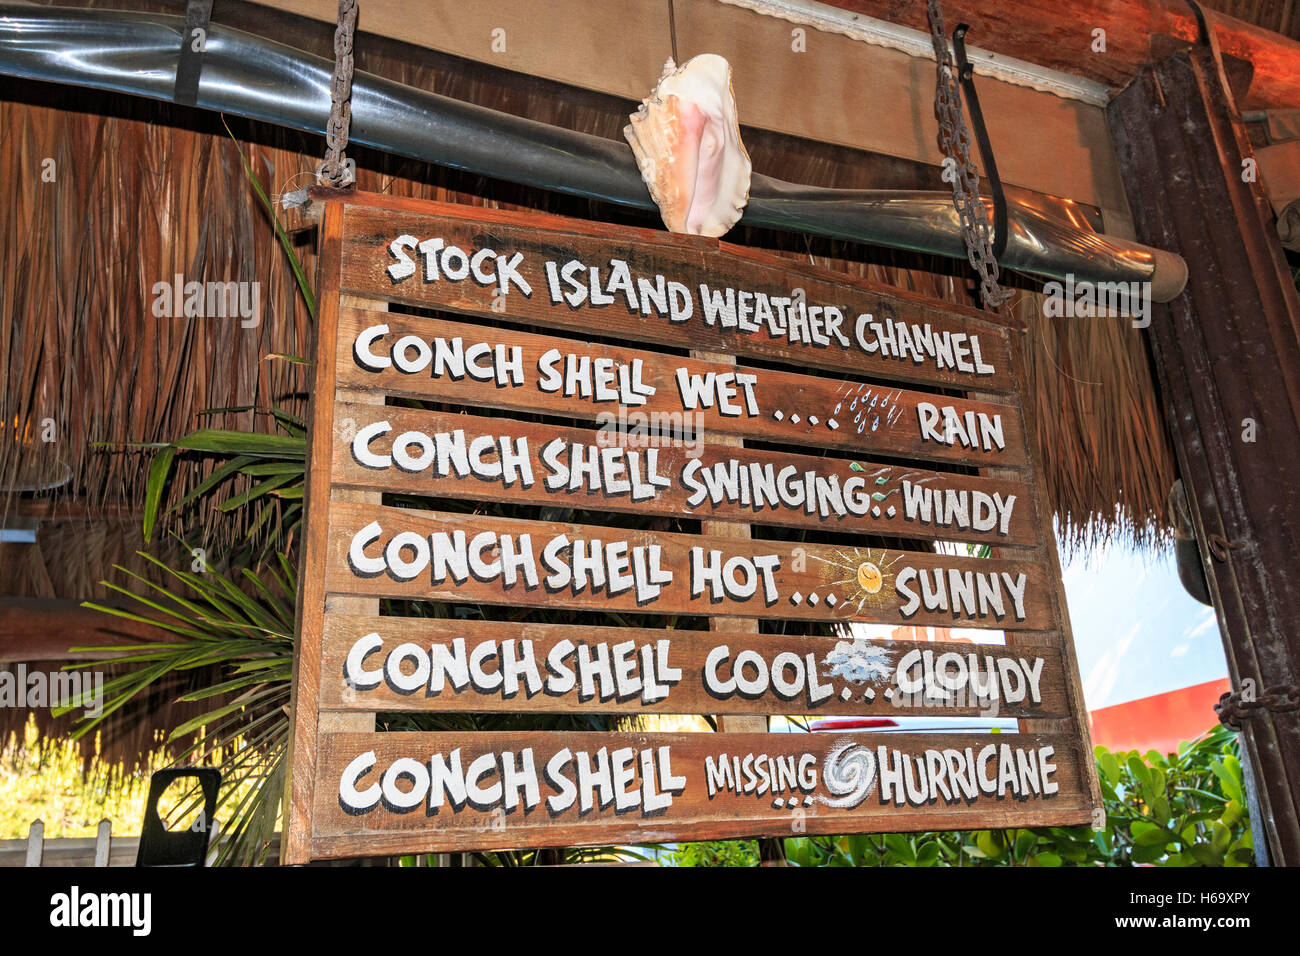 Quirky sign at Hogfish Bar & Grill. A great, local, authentic place for fish on Stock Island in the Florida Keys. Stock Photo